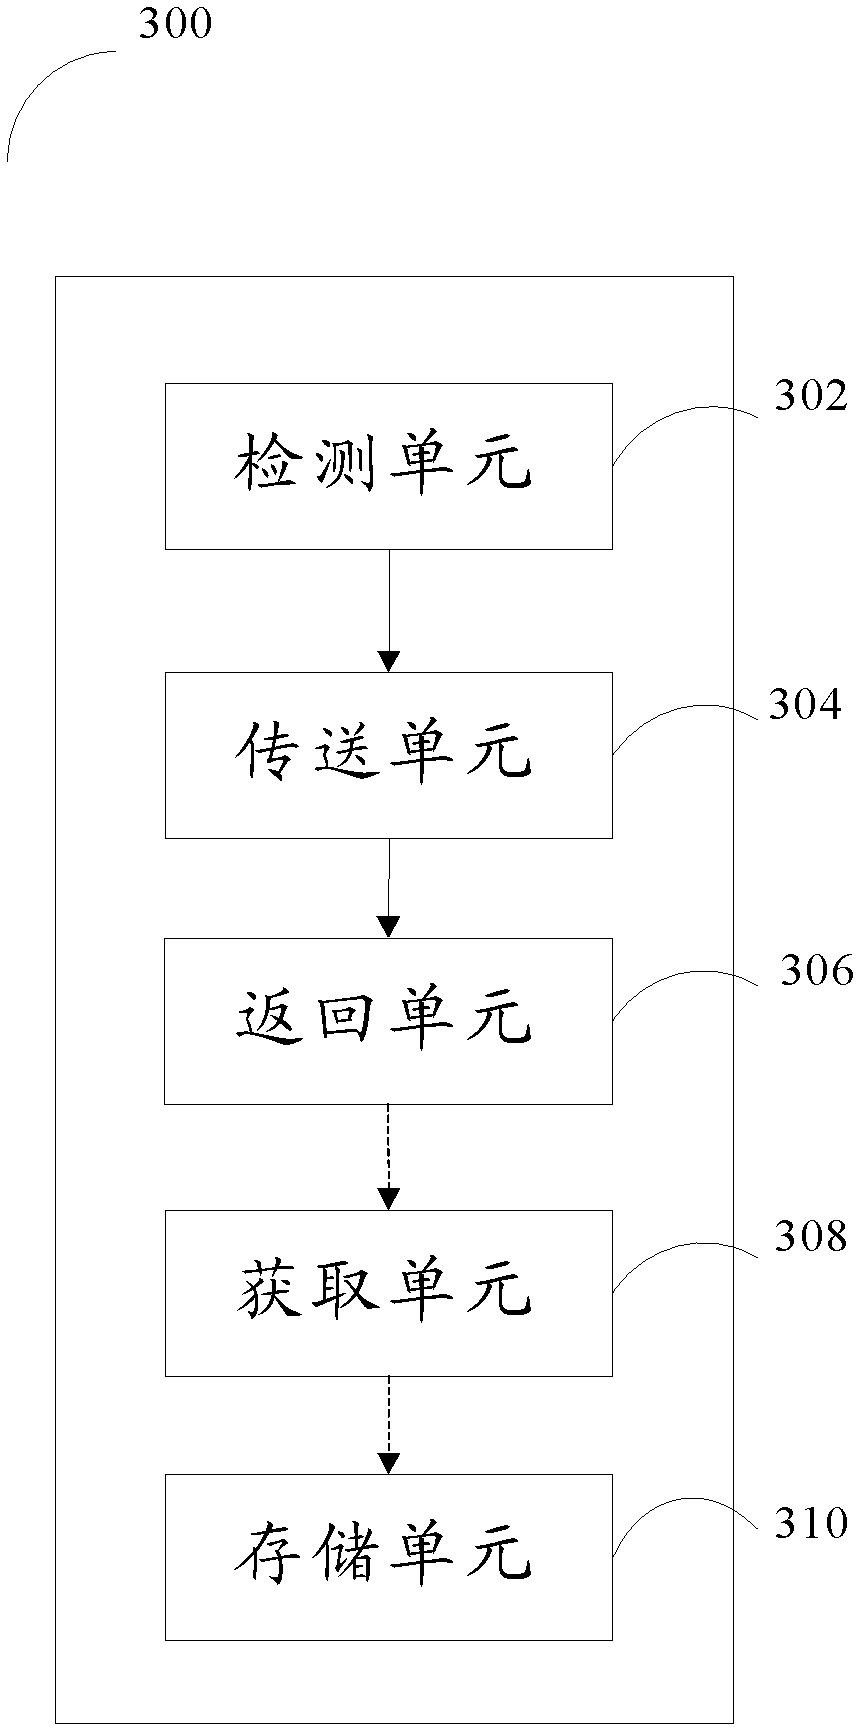 Method and system for inquiring database with user defined function